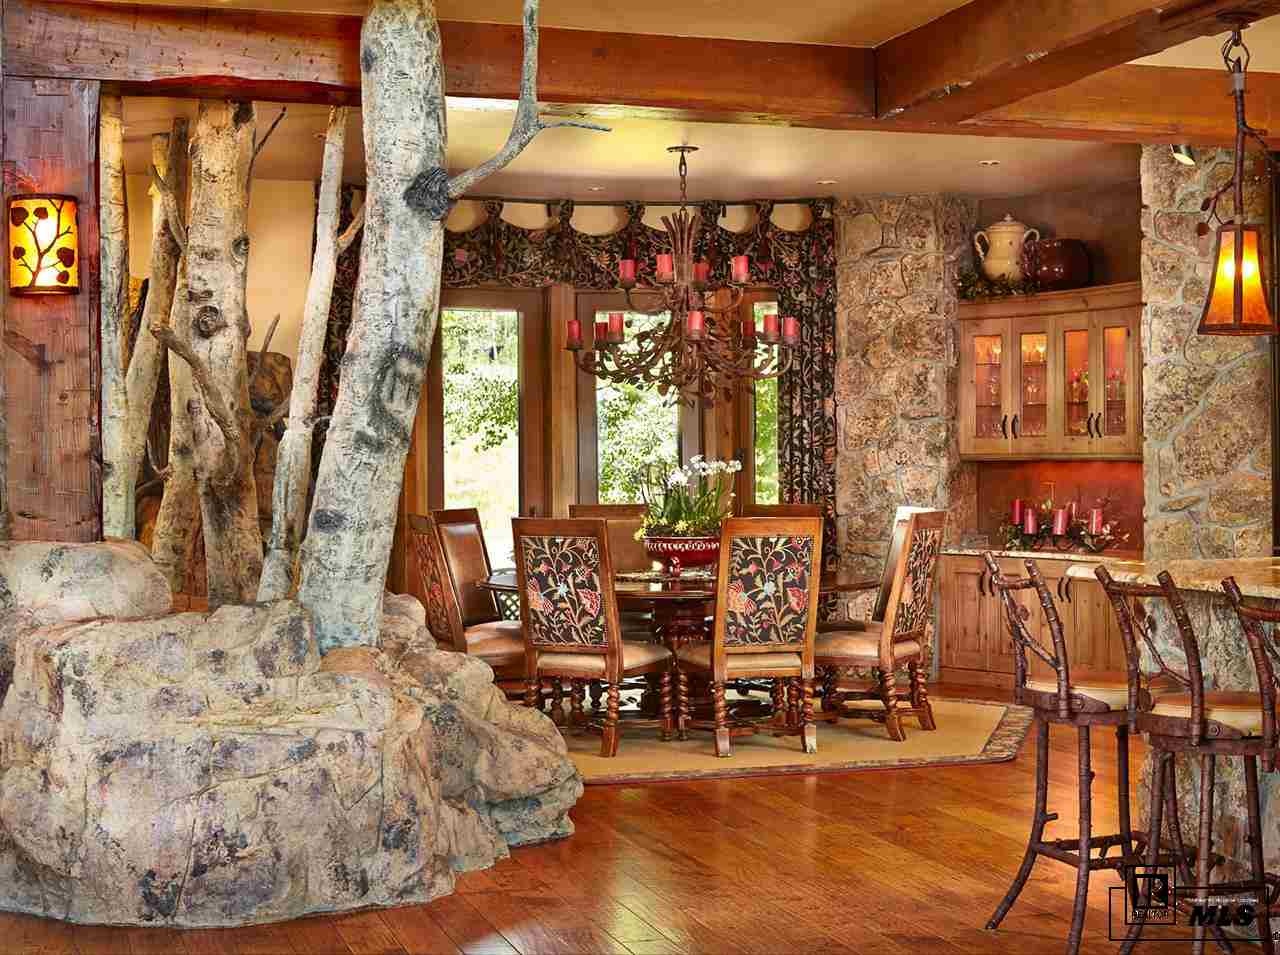 House of the Week: Steamboat Springs Ranch With Deluxe Bunk Room